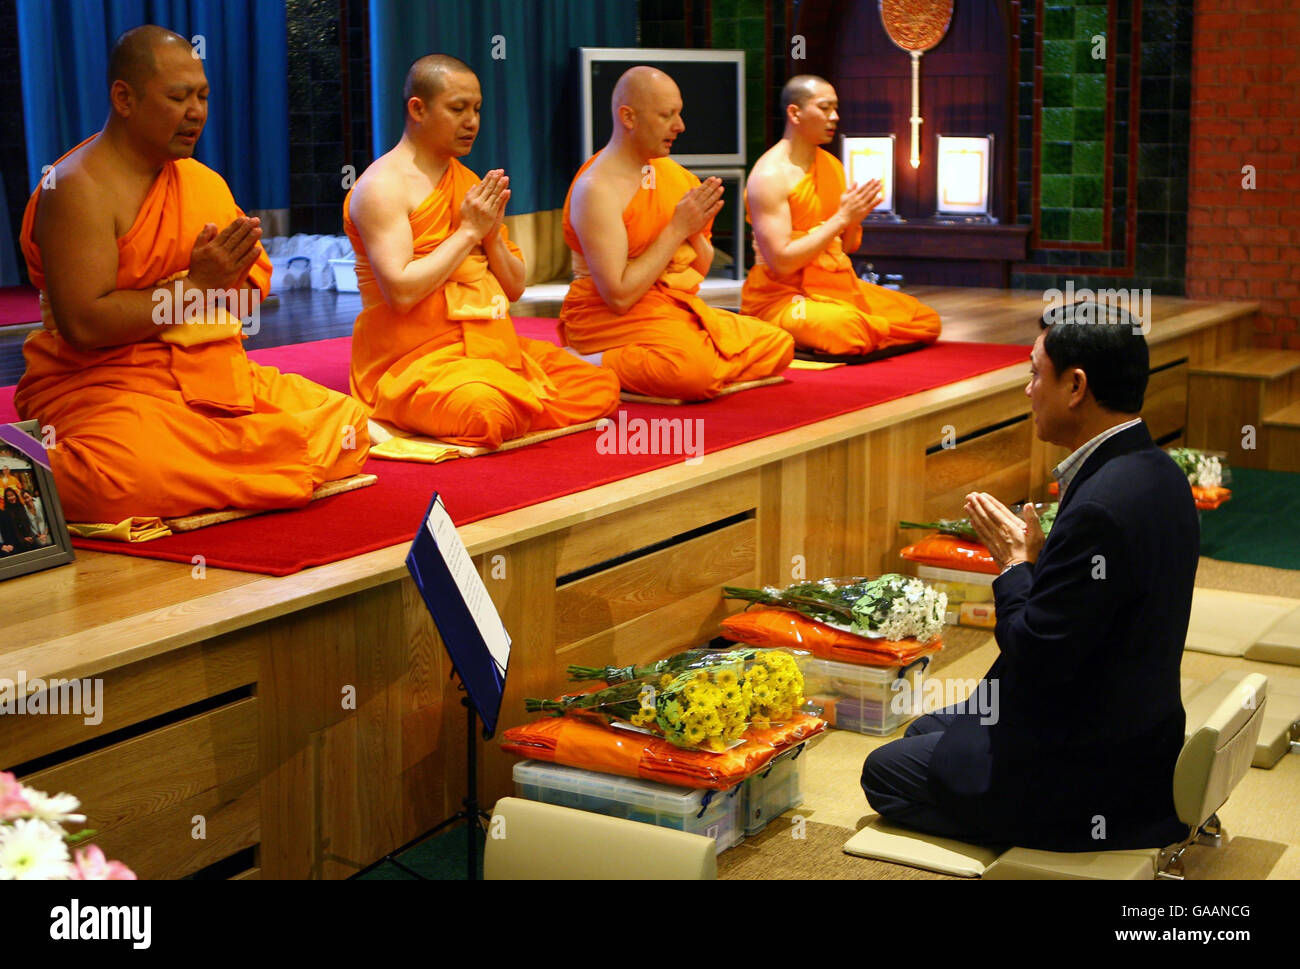 Dr. Thaksin Shinawatra, former Prime Minister of Thailand, prays with monks at the Dhammakaya Centre for Buddist Meditation in Knaphill, Surrey, a year after being ousted from office. Stock Photo